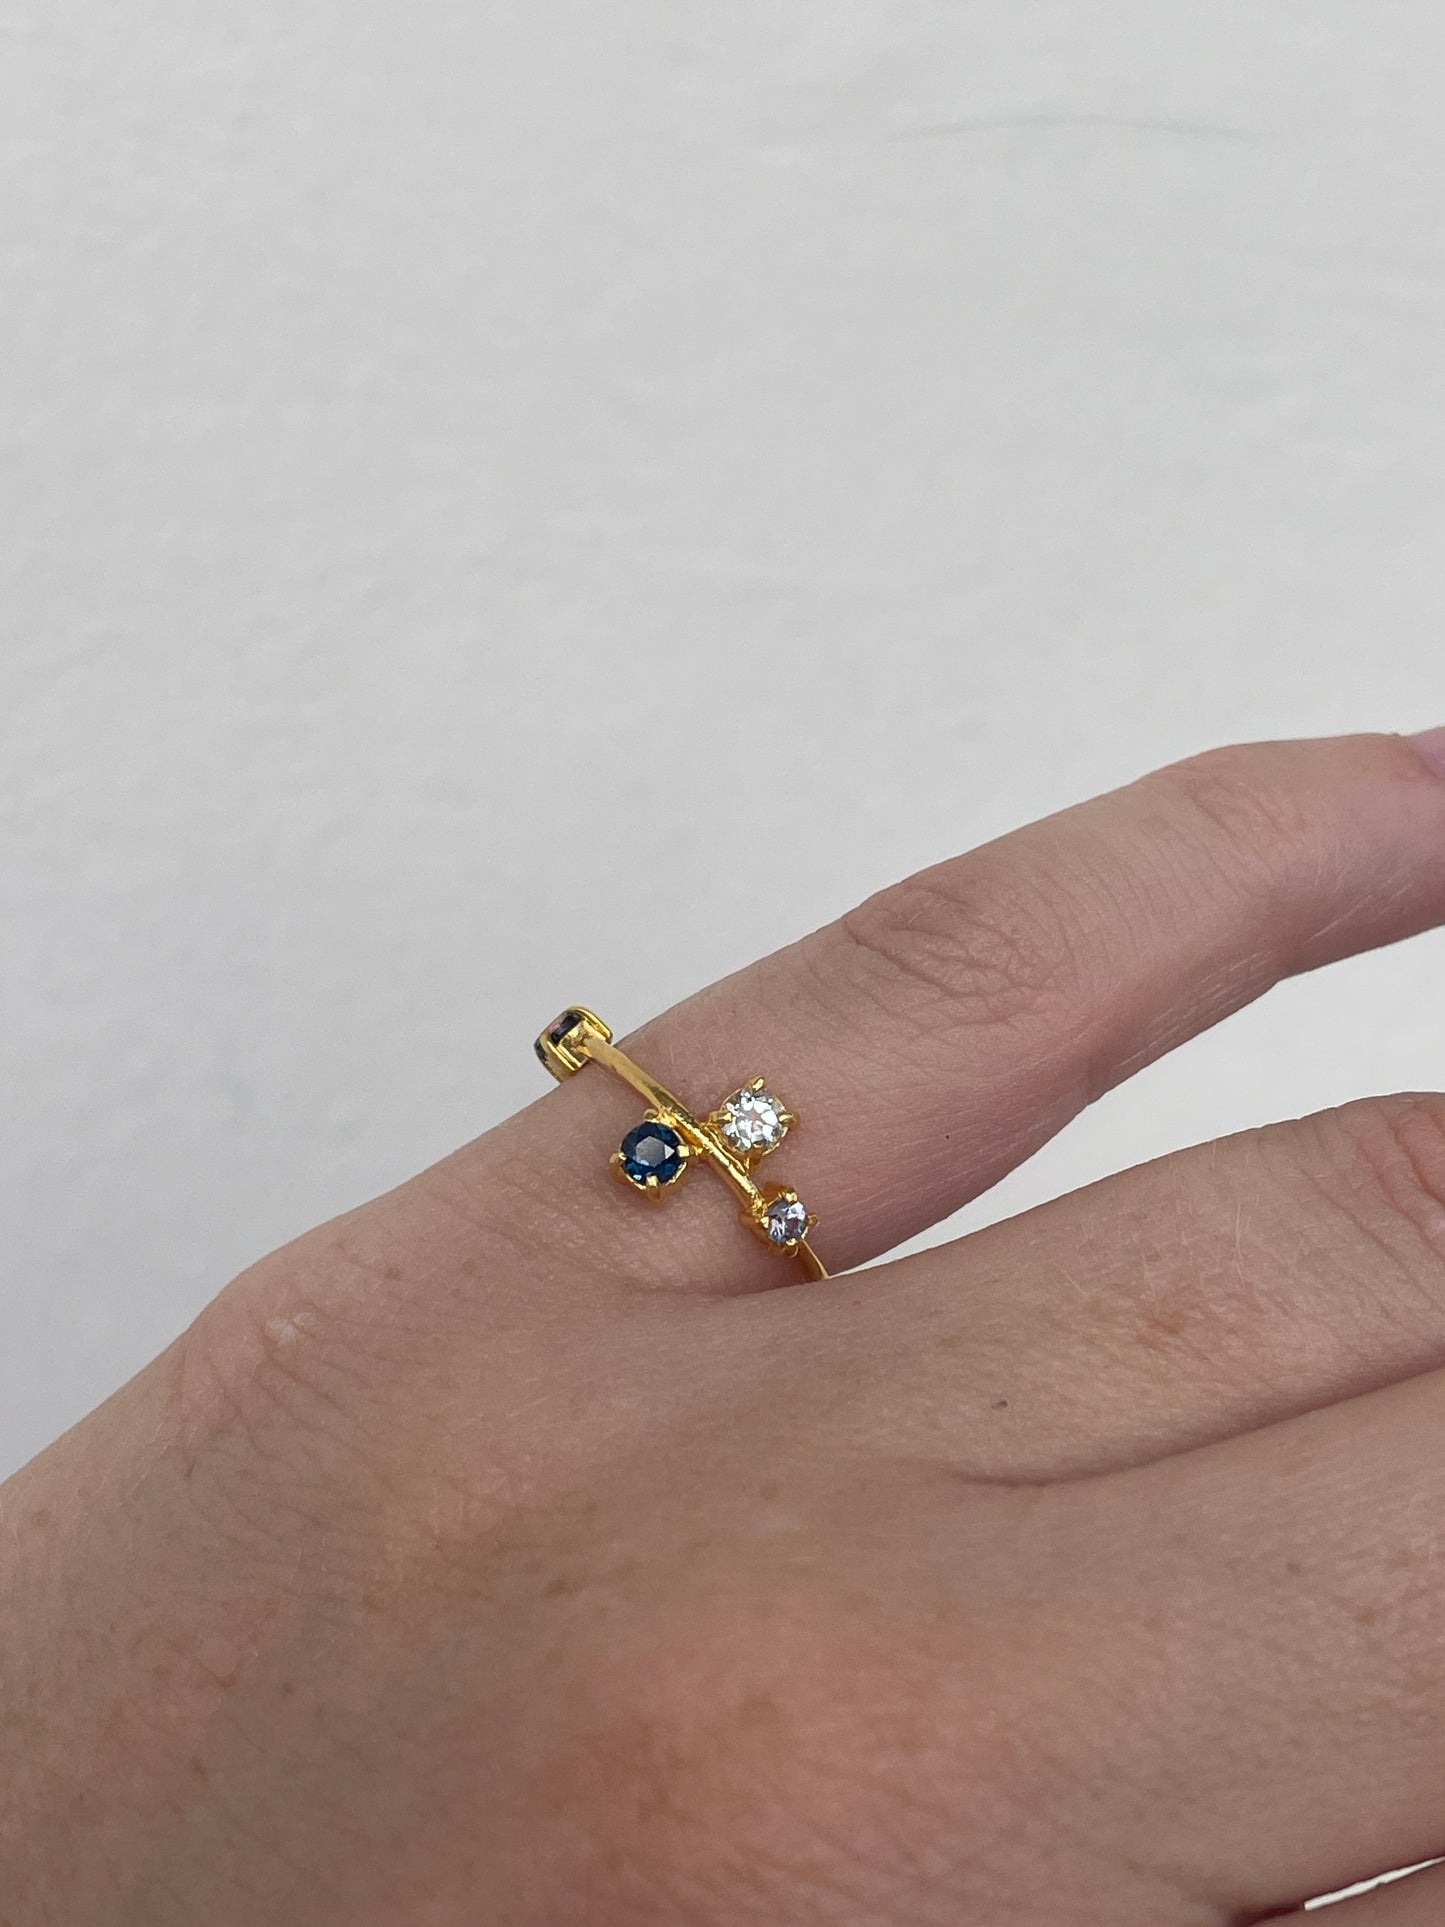 Galaxy Ring Gold with Ultramarine Blue Sapphires and Opals - size 6